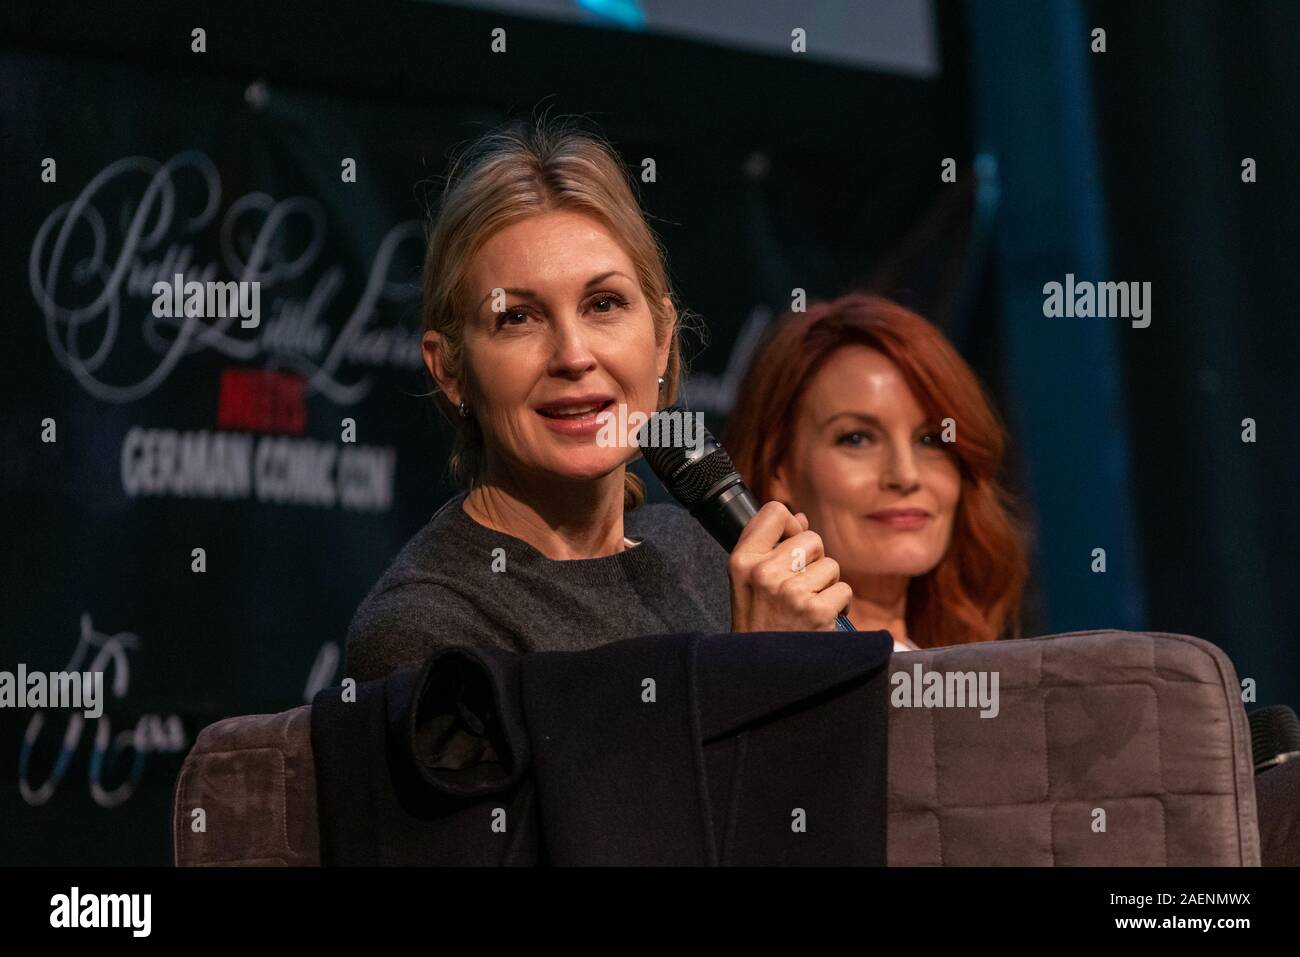 DORTMUND, GERMANY - December 8th 2019: Kelly Rutherford and Laura Leighton at German Comic Con Dortmund, a two day fan convention Stock Photo